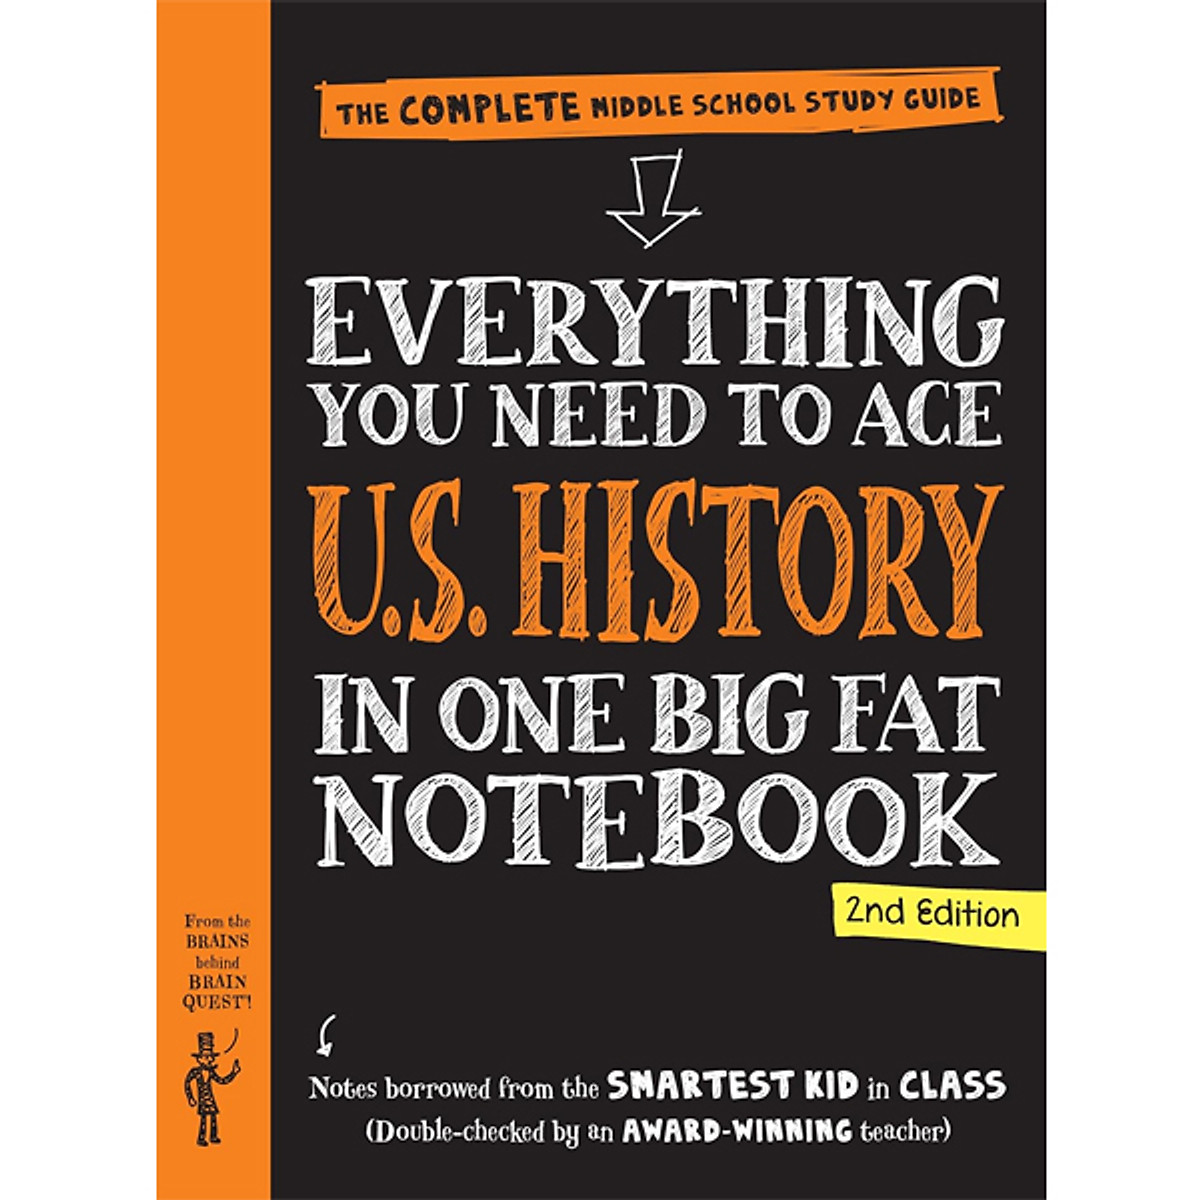 Everything You Need To Ace U.S. History In One Big Fat Notebook, Second Edition: The Complete Middle School Study Guide (Big Fat Notebooks)